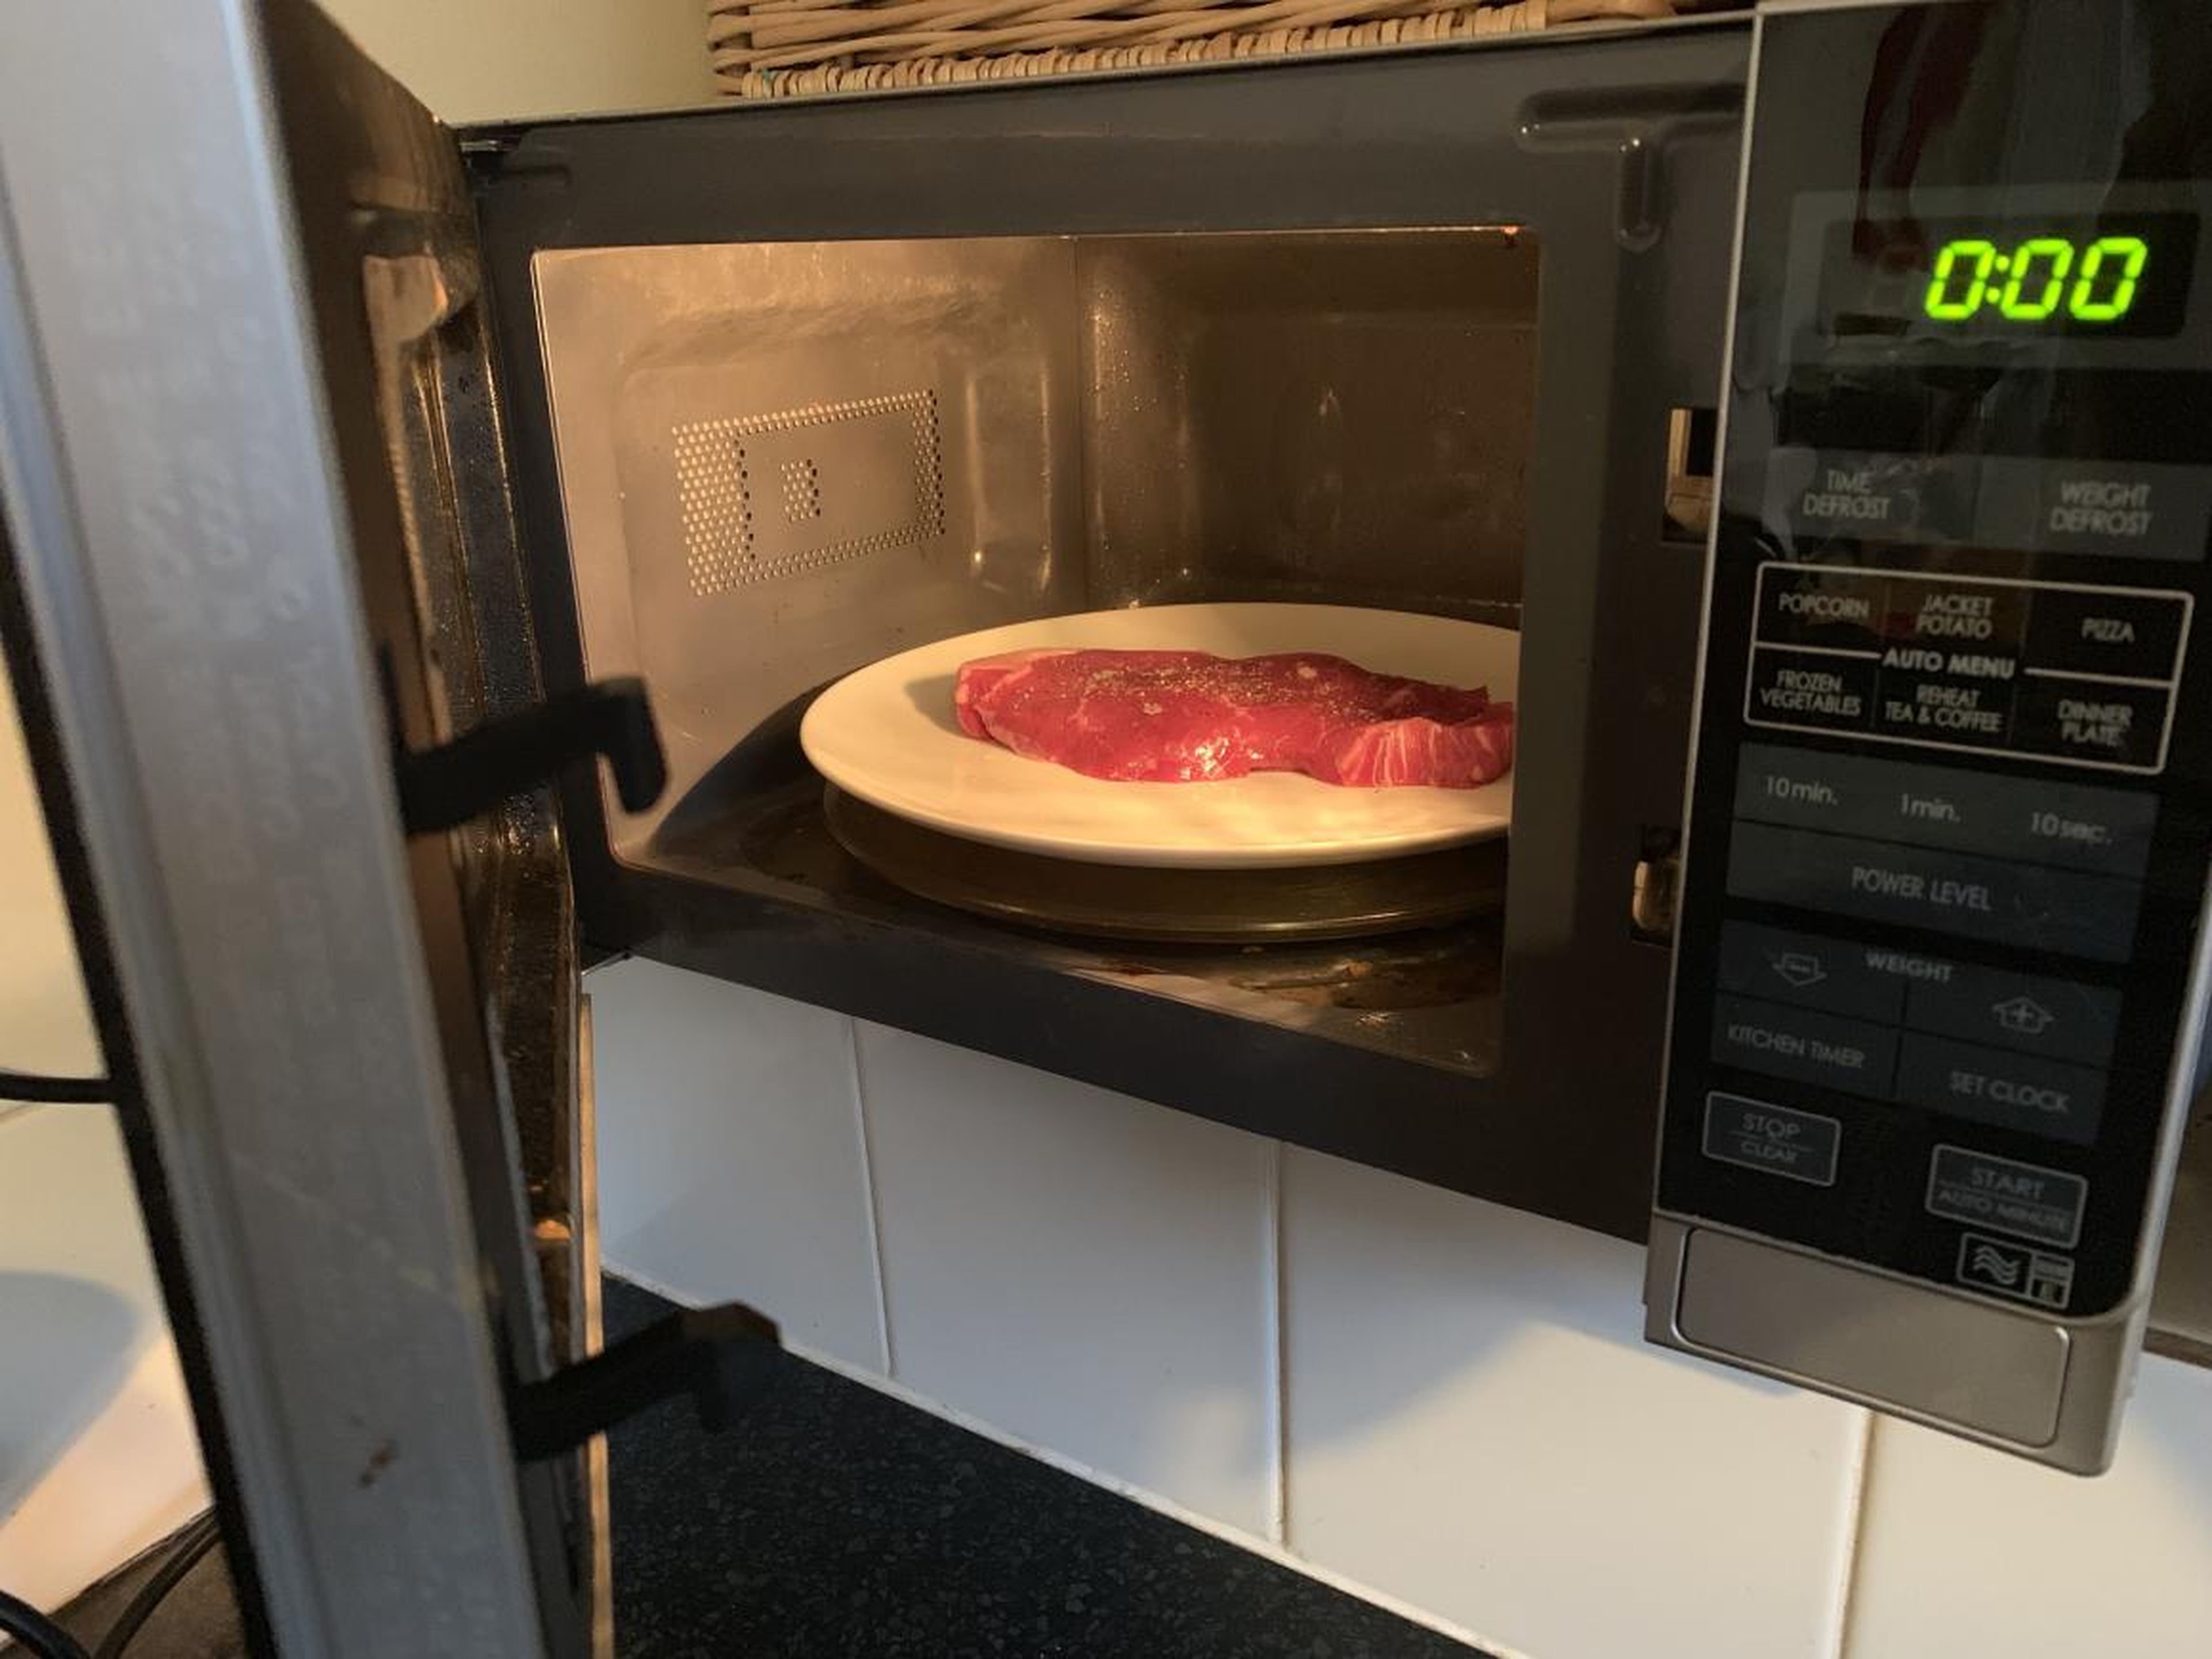 "I reluctantly put the steak into the microwave, going against everything my Bon Appetit subscription has taught me."